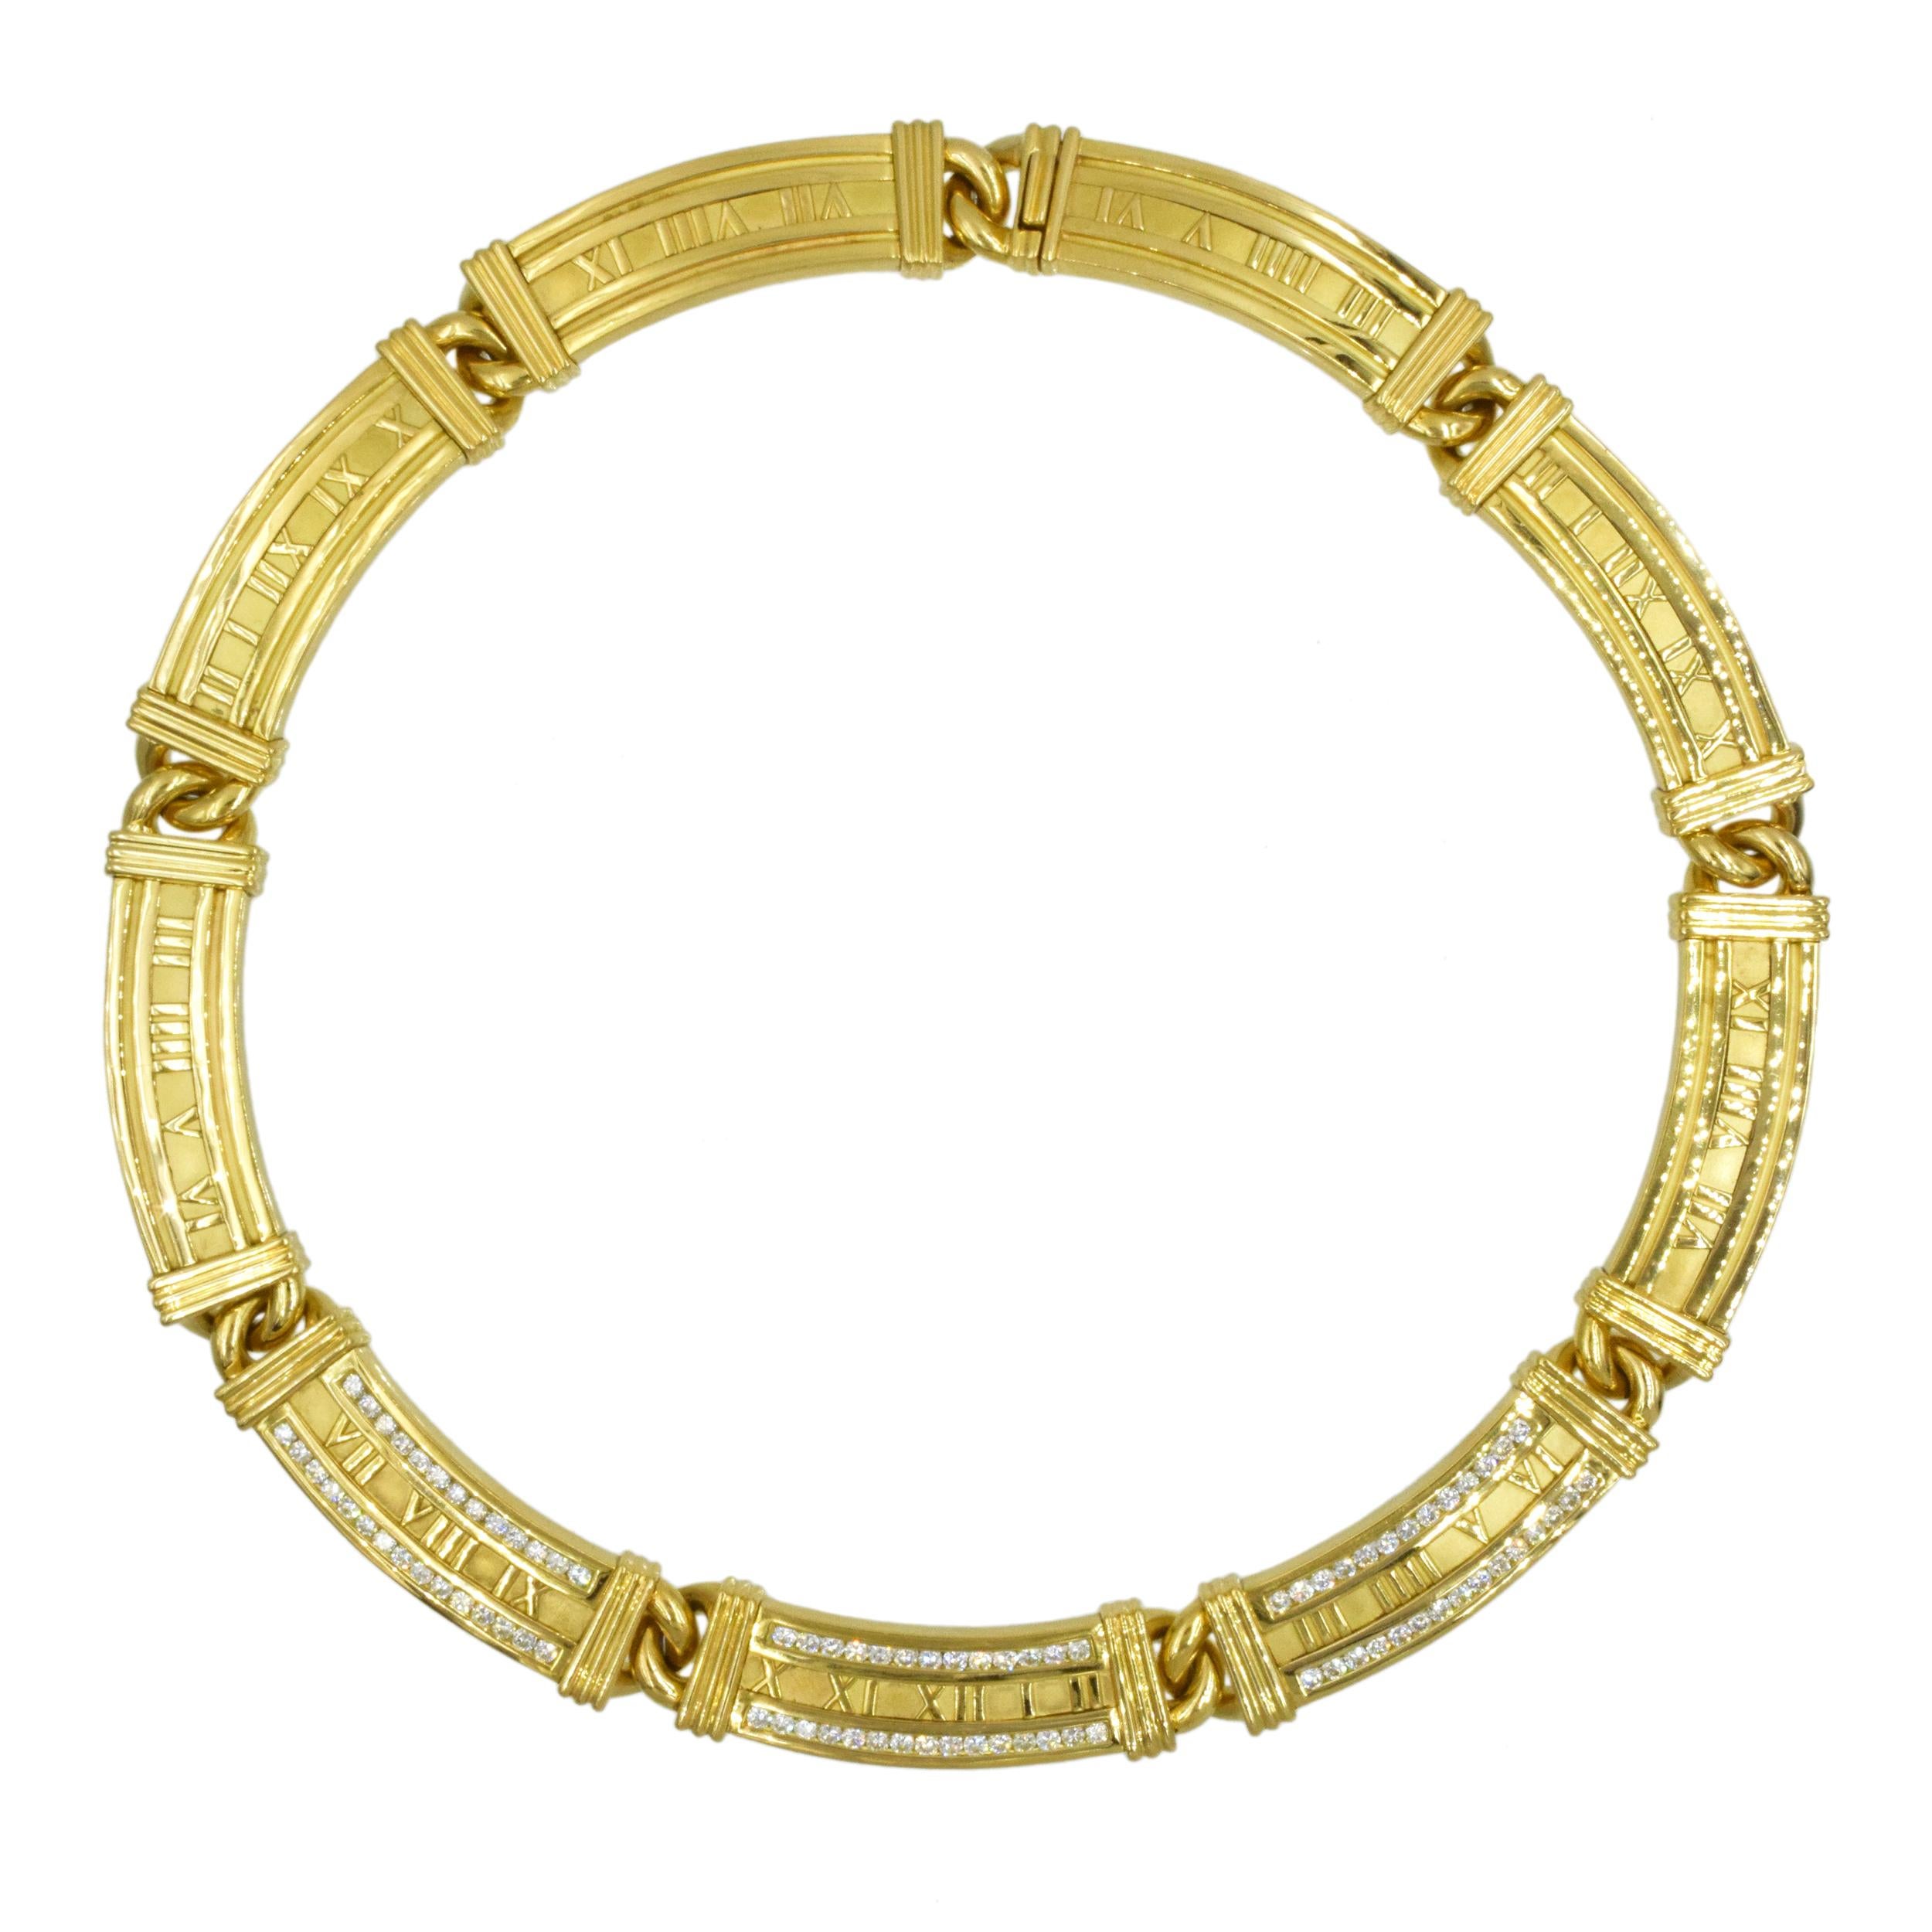 Diamond and 18k Yellow Gold 'Atlas' Collection, Tiffany This necklace has 84 round brilliant diamonds channel set in 18k yellow gold in the 'Atlas' collection of Tiffany. Signed Tiffany, 1995 Italy,